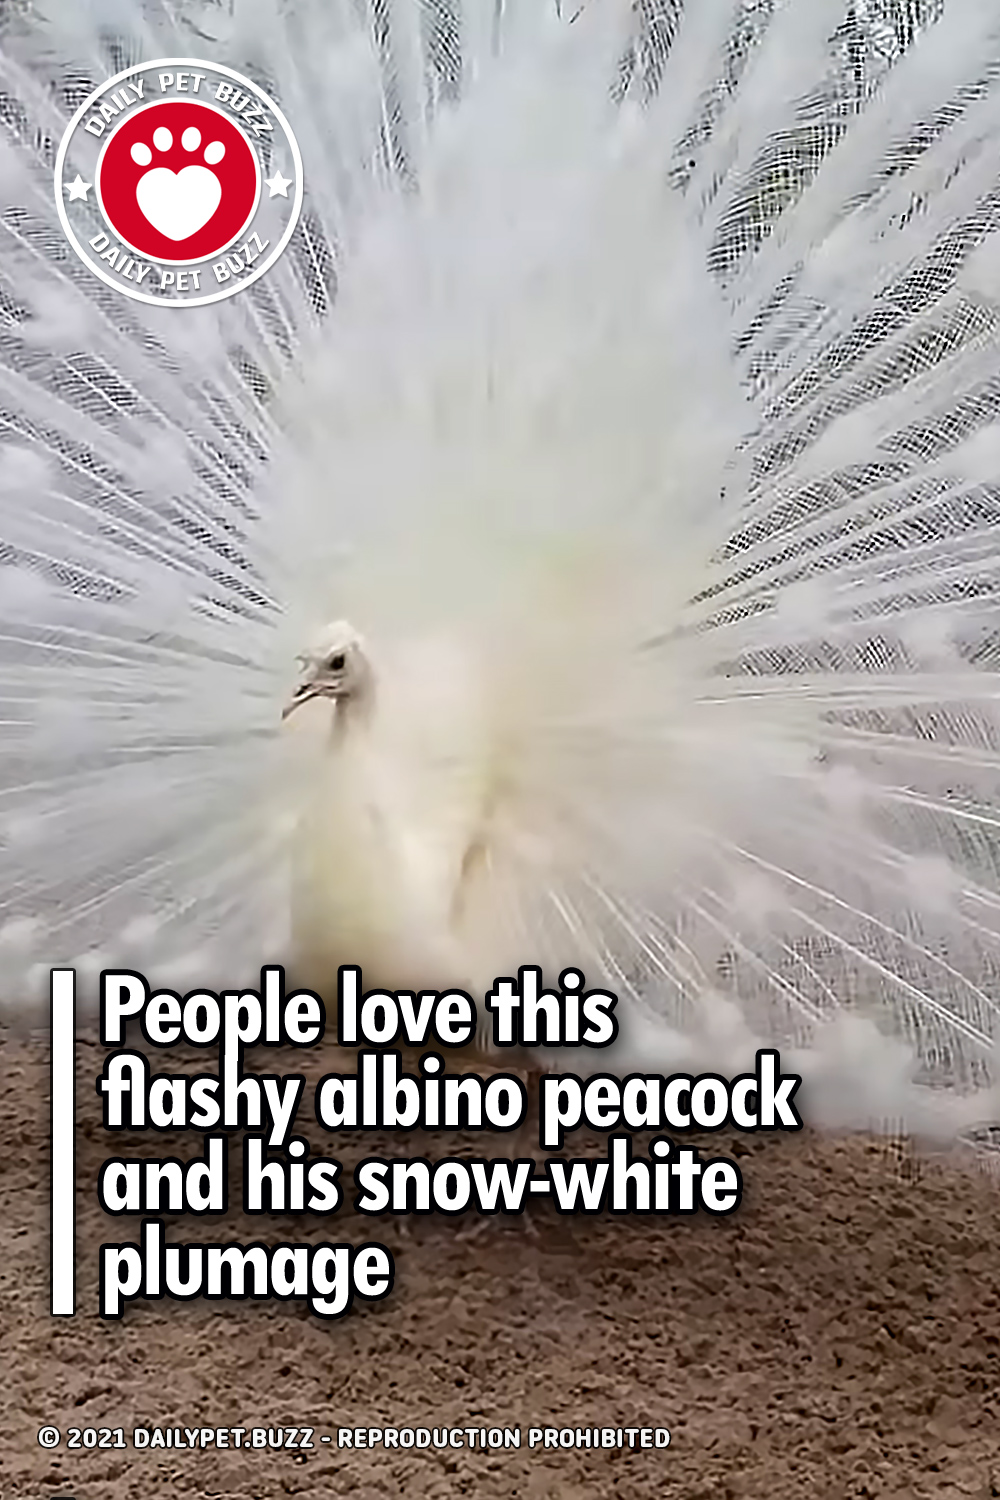 People love this flashy albino peacock and his snow-white plumage